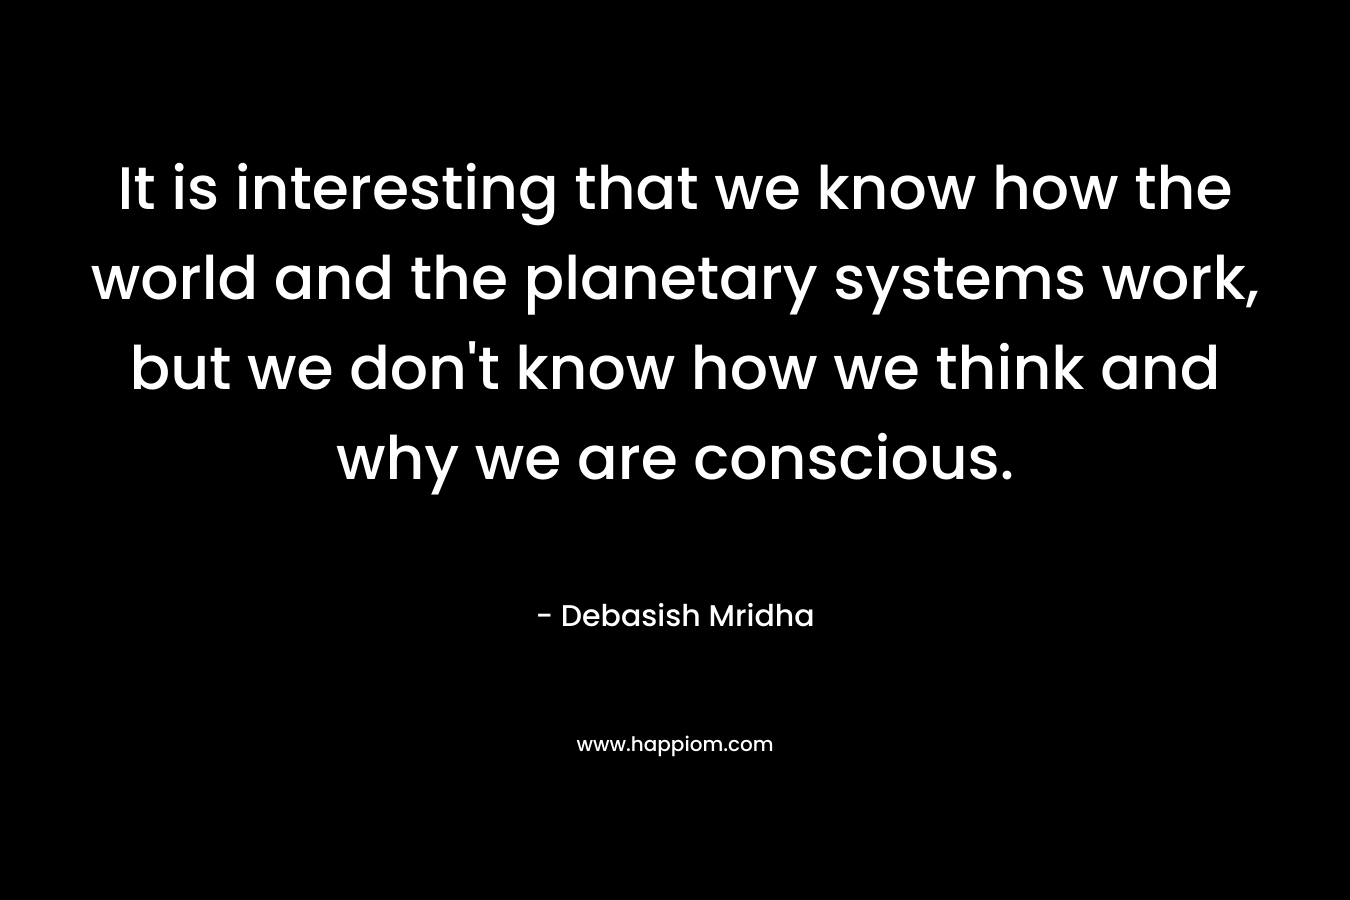 It is interesting that we know how the world and the planetary systems work, but we don’t know how we think and why we are conscious. – Debasish Mridha